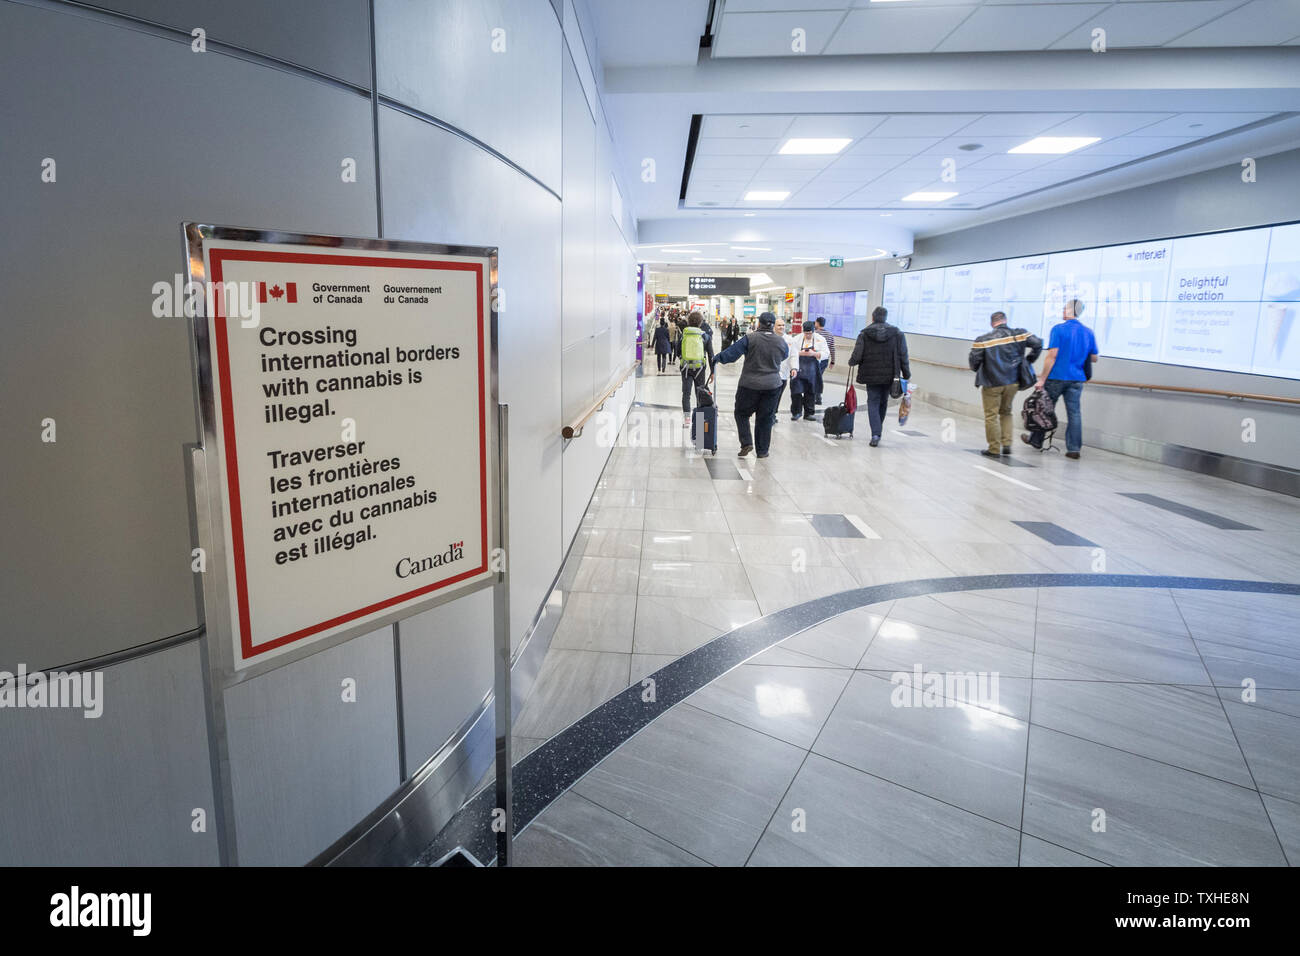 TORONTO, CANADA - NOVEMBER 15, 2018: Sign in Toronto Alan Pearson Airport reminding it is forbidden to export Cannabis outside of Canada, despite the Stock Photo